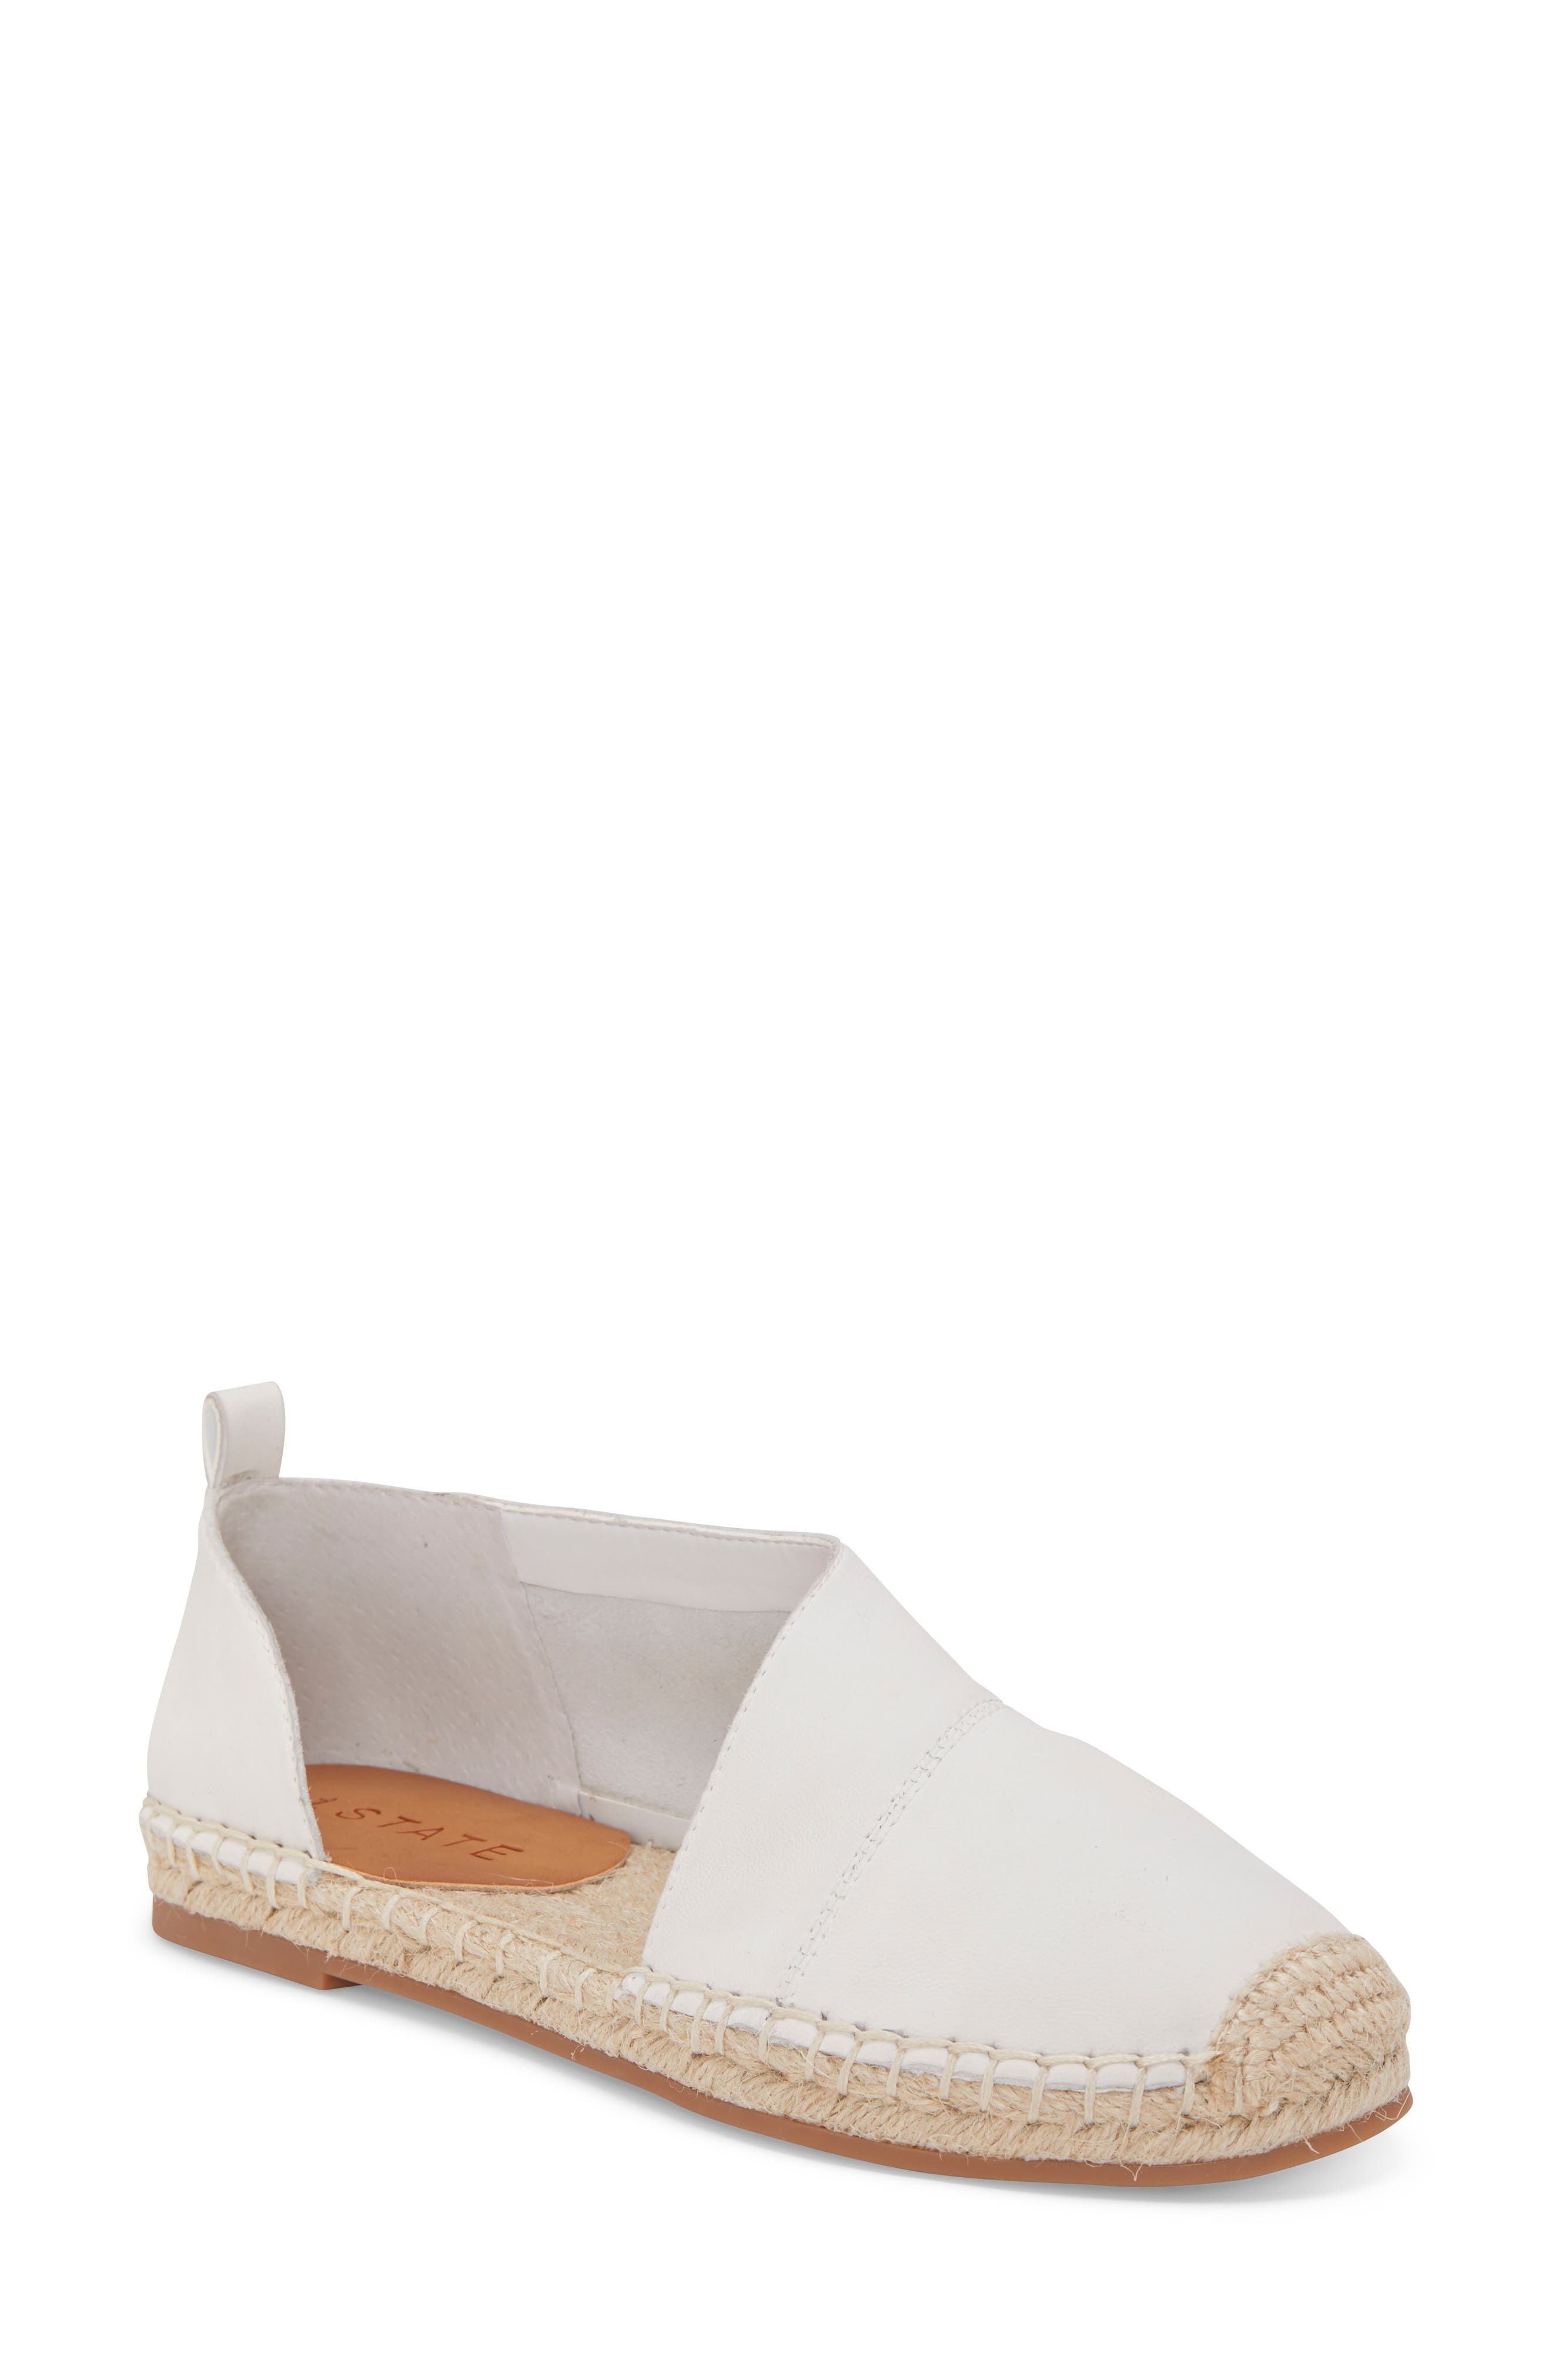 Women's Flat 1.STATE Shoes | Nordstrom